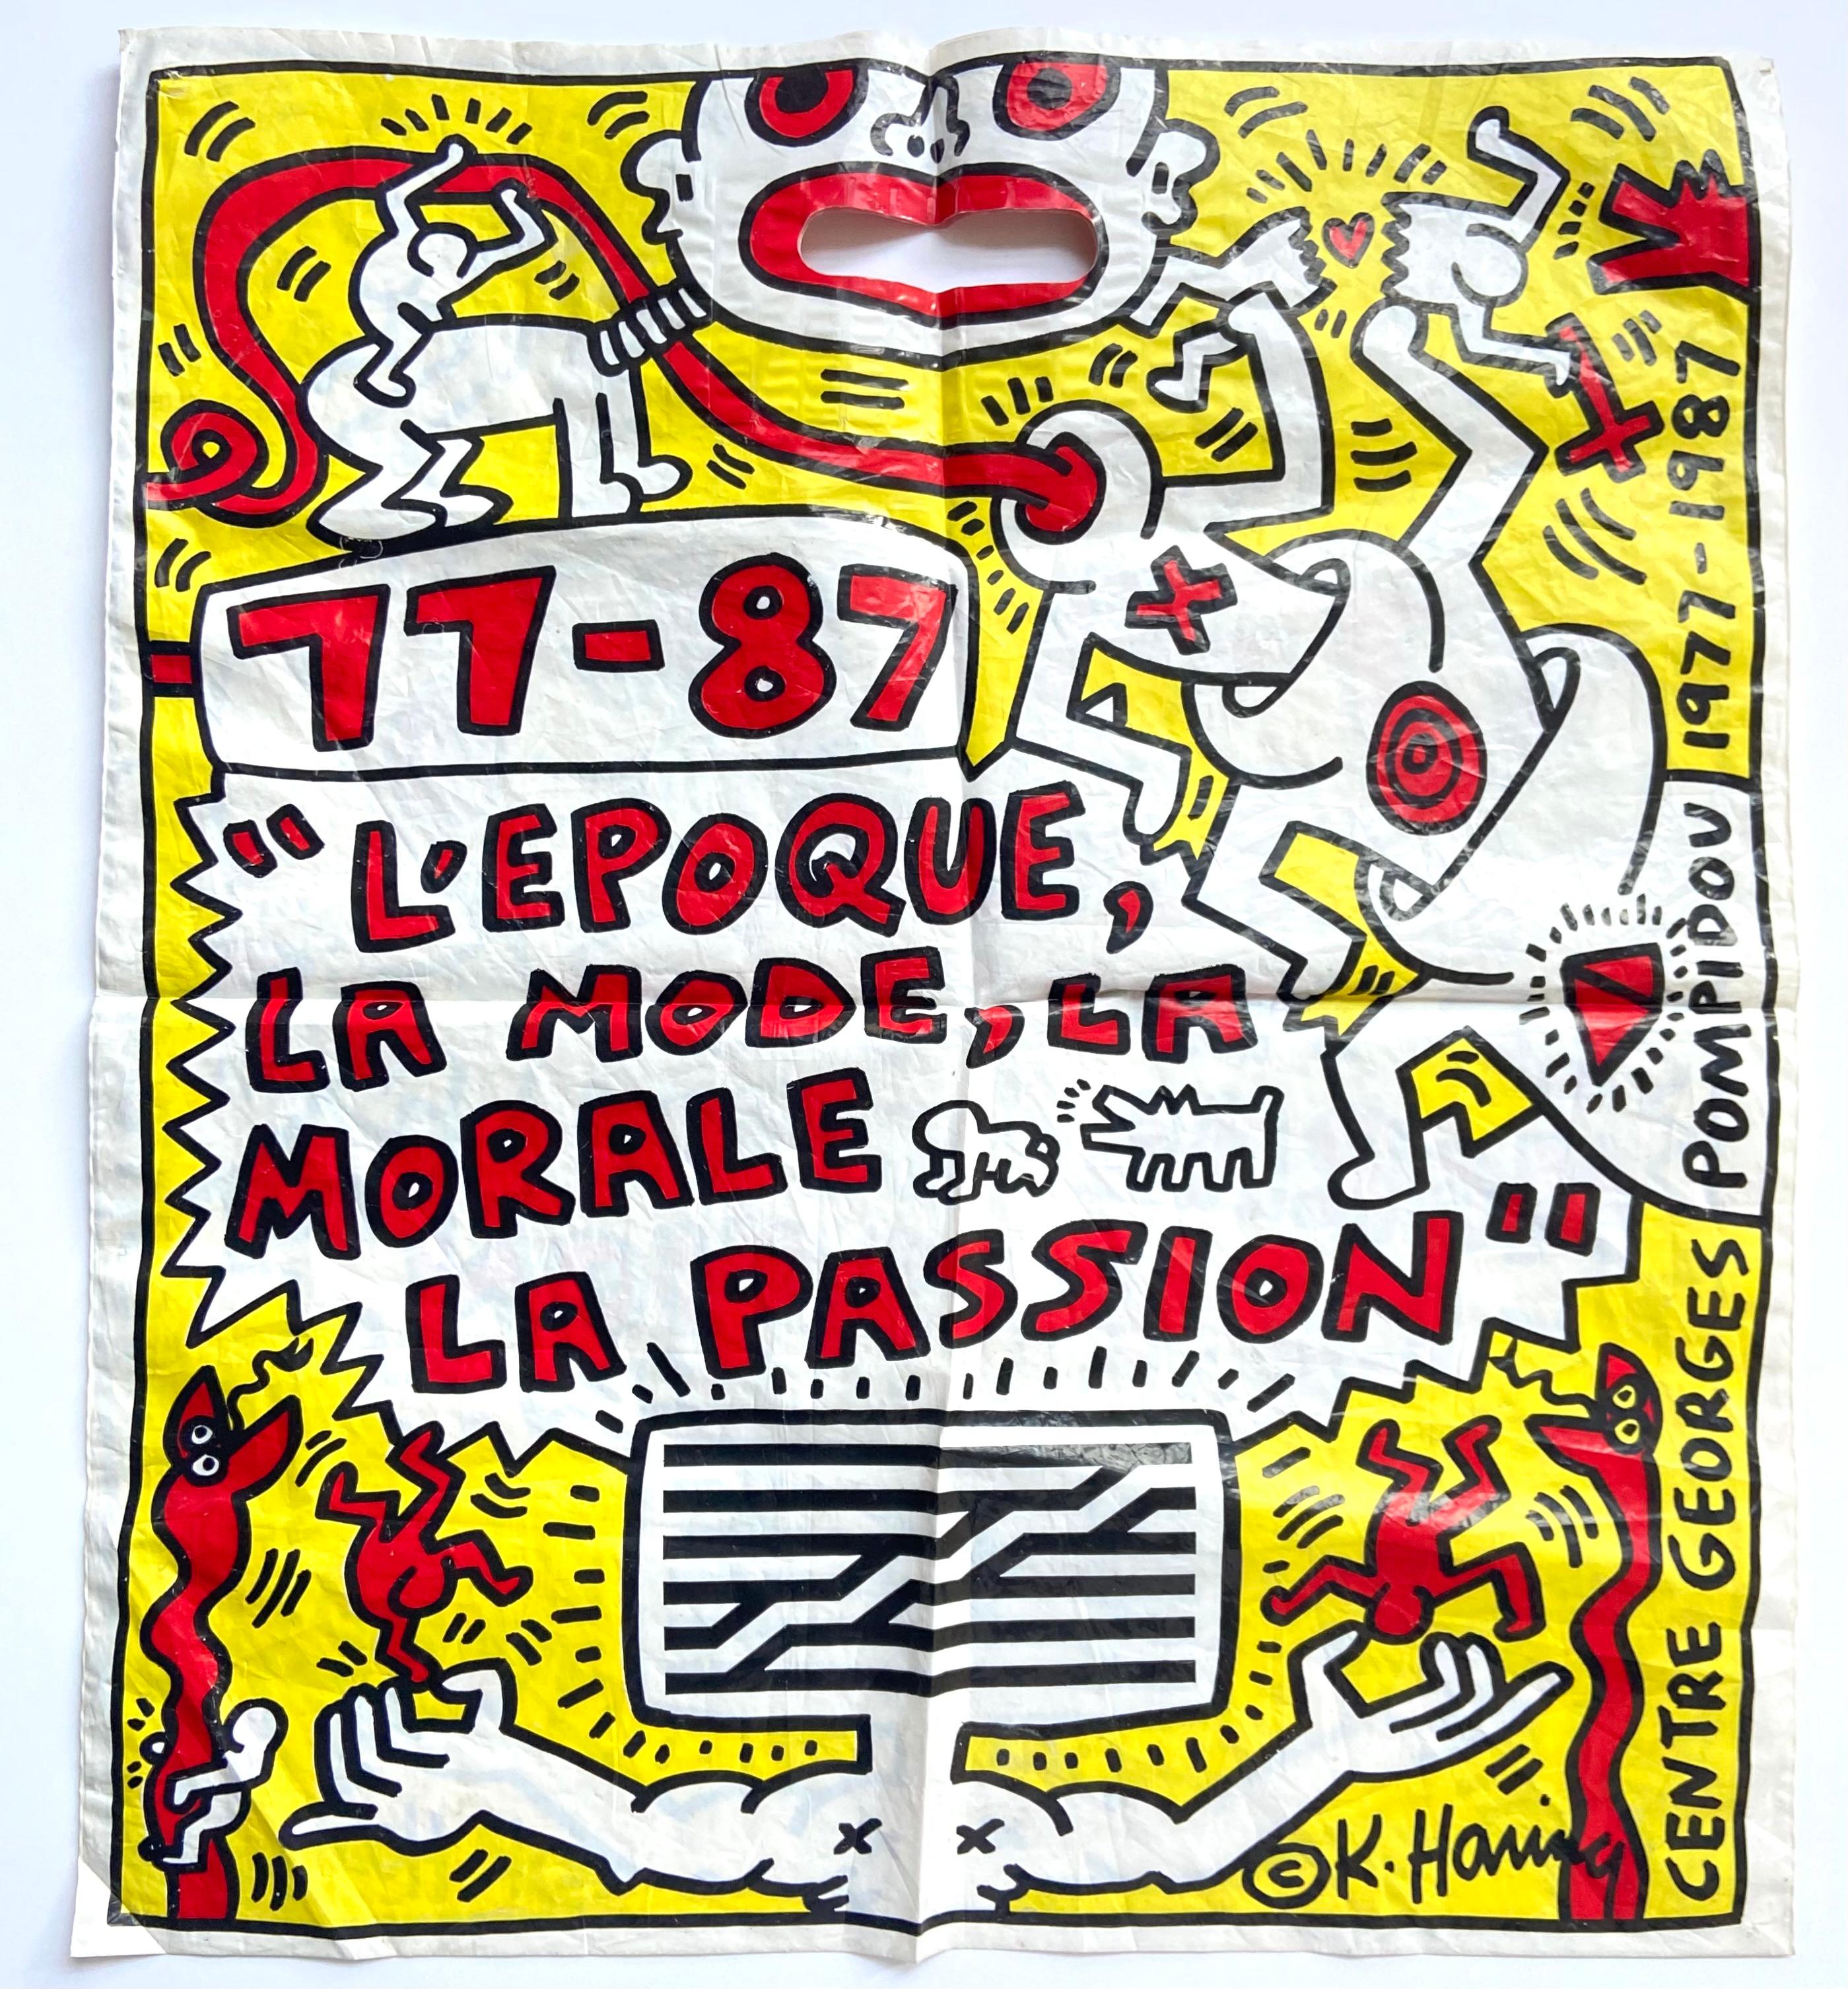 Keith Haring Paris, 1987:
Well-suited for framing, this vibrant oversized illustrated bag was designed by Keith Haring during his lifetime for the Pompidou exhibit:

L’Epoque, La Mode, La Morale, La Passion: Aspectsde l’Art d’ Aujourd’hui,